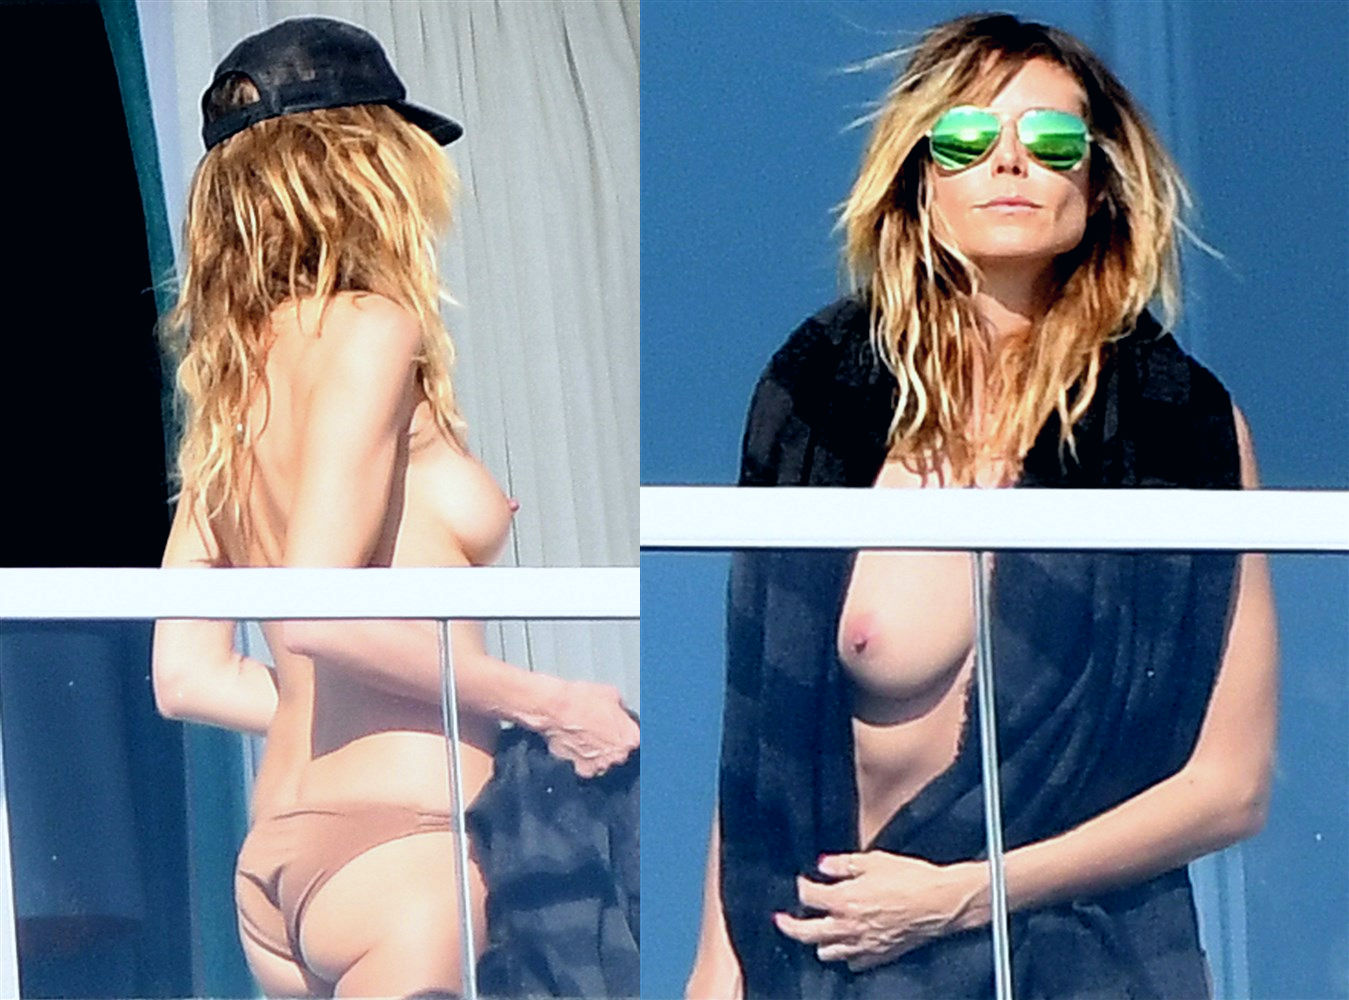 Model Heidi Klum doesn't care if you see her tits... 